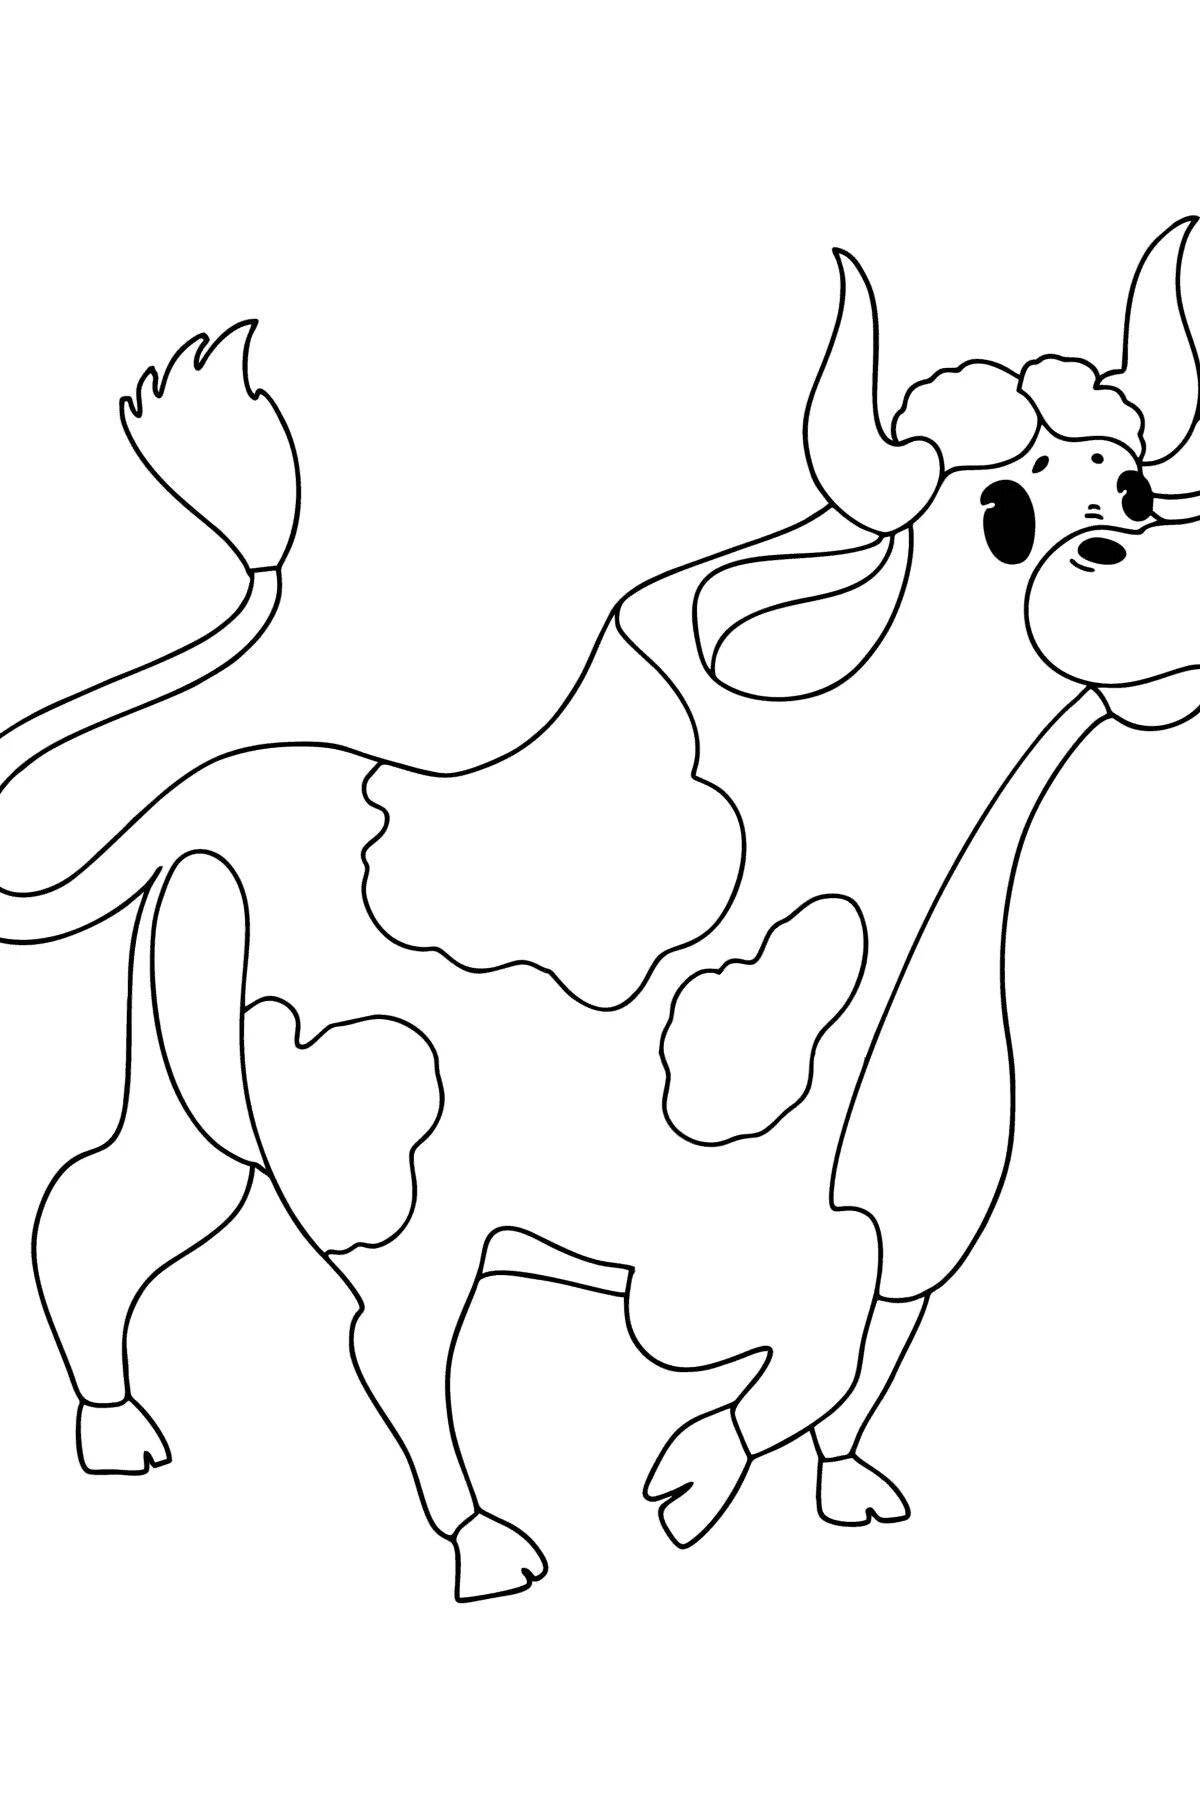 Awesome cow coloring page for 5-6 year olds